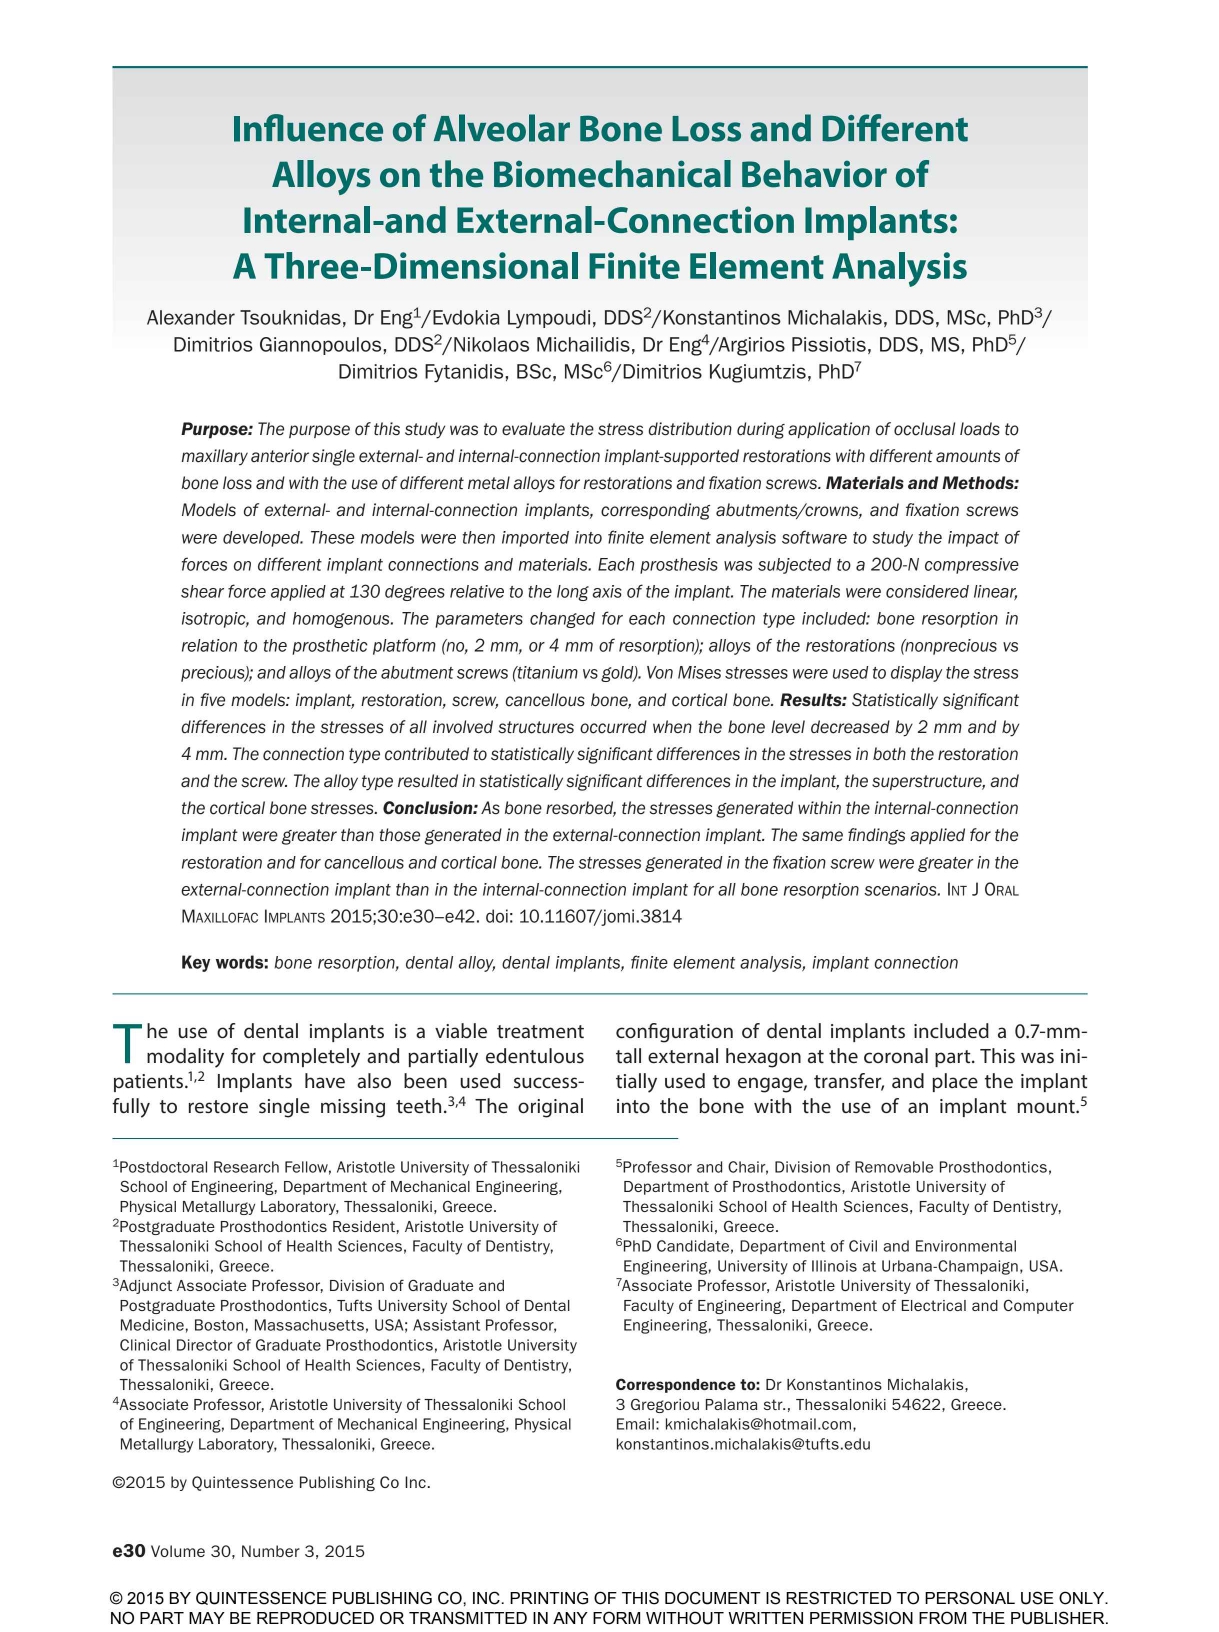 Influence of Alveolar Bone Loss and Different Alloys on the Biomechanical Behavior of Internal-and External-Connection Implants: A Three-Dimensional Finite Element Analysis